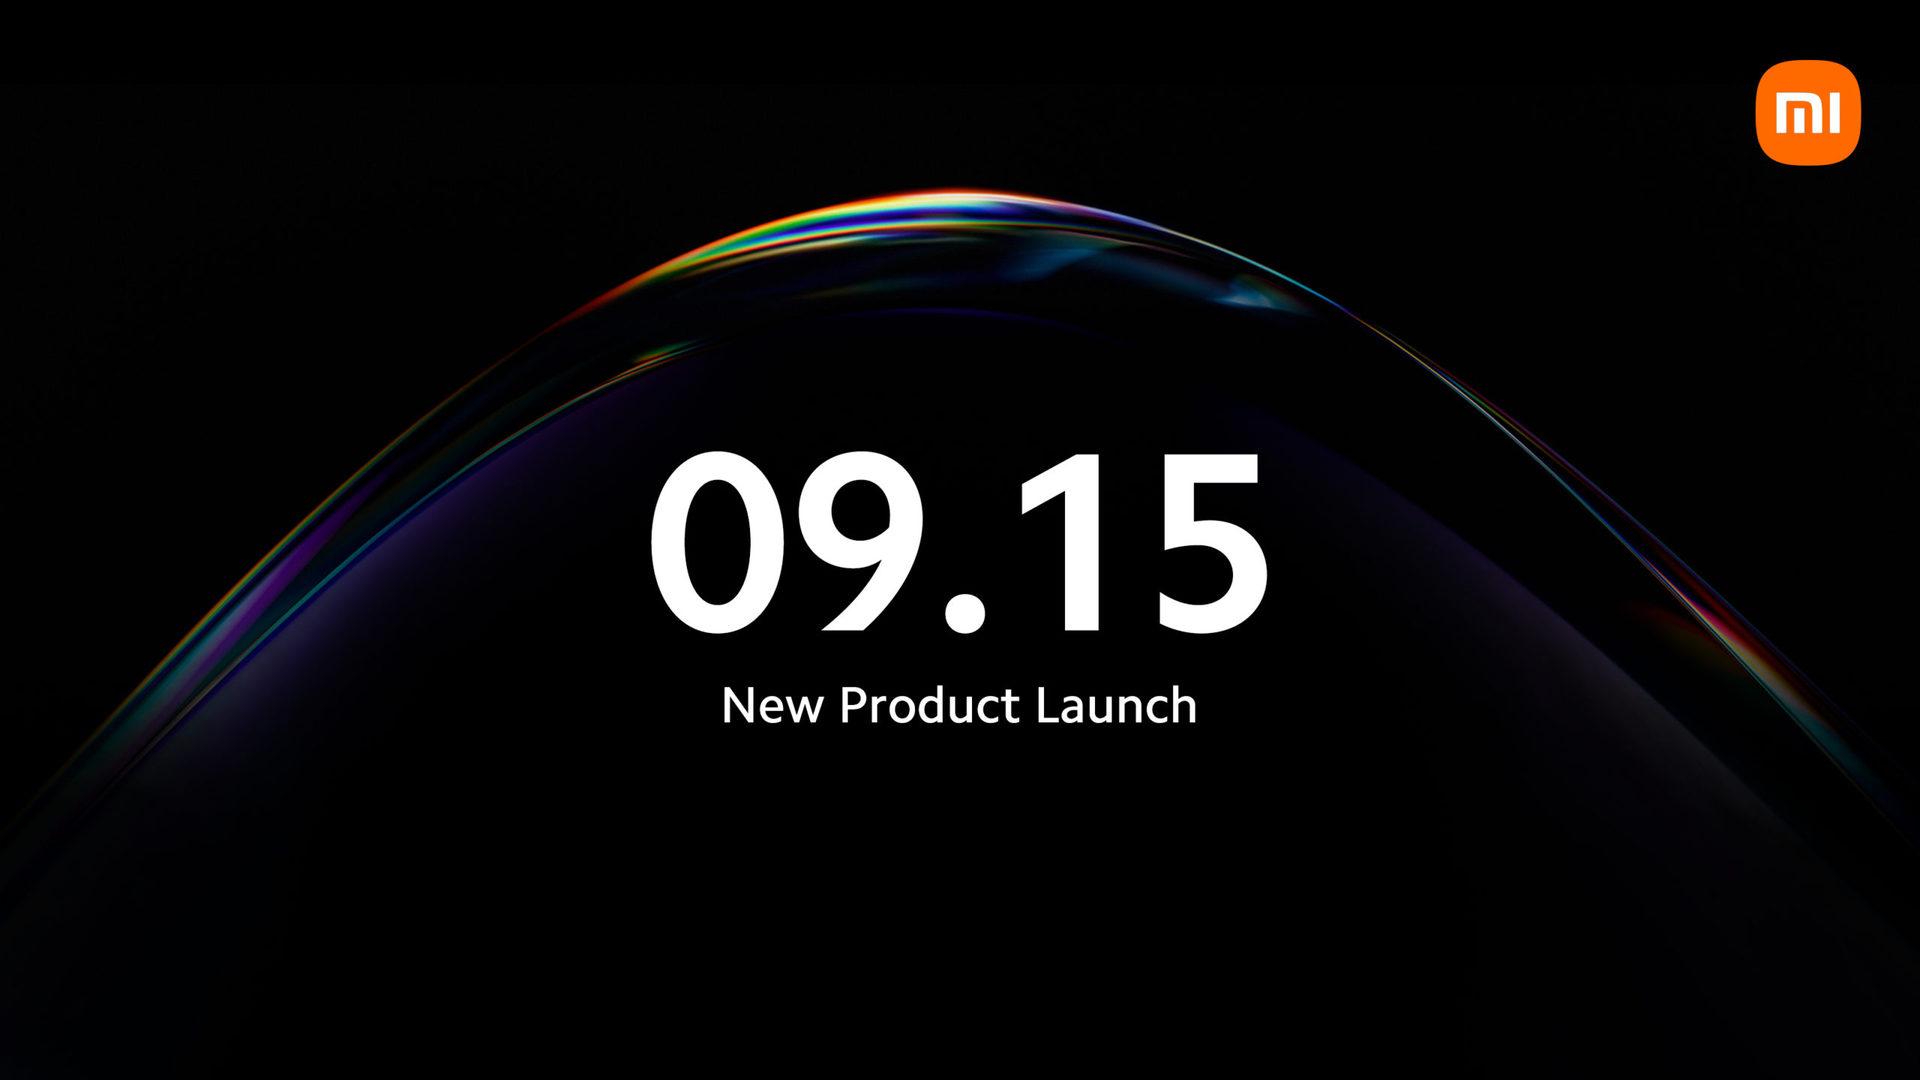 Xiaomi released on September 15, 2021